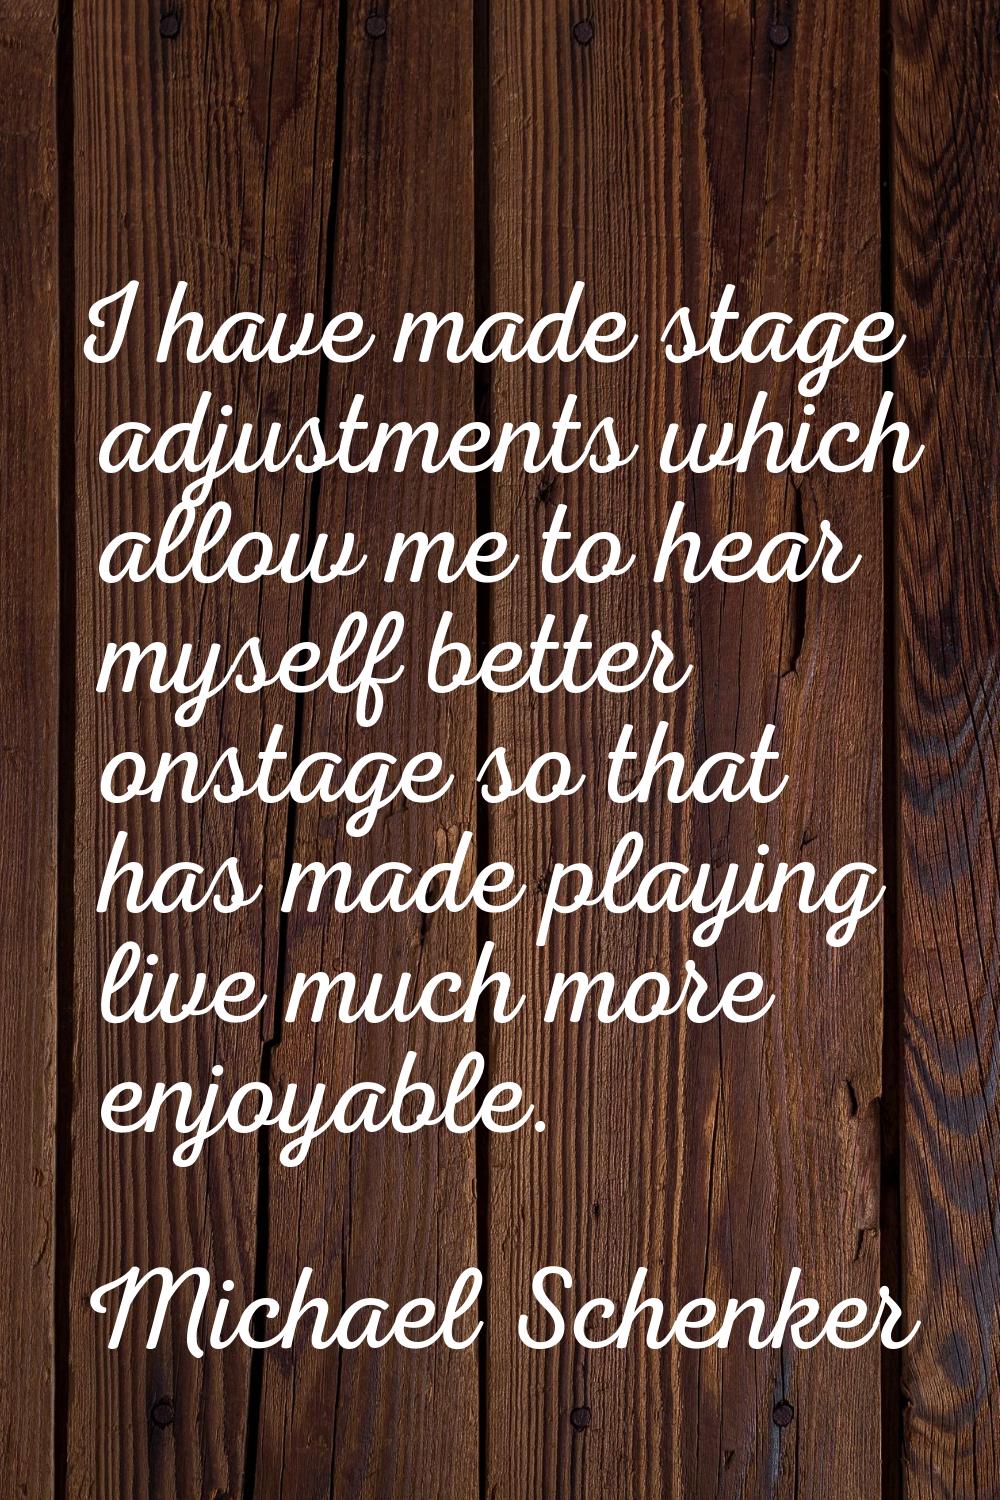 I have made stage adjustments which allow me to hear myself better onstage so that has made playing